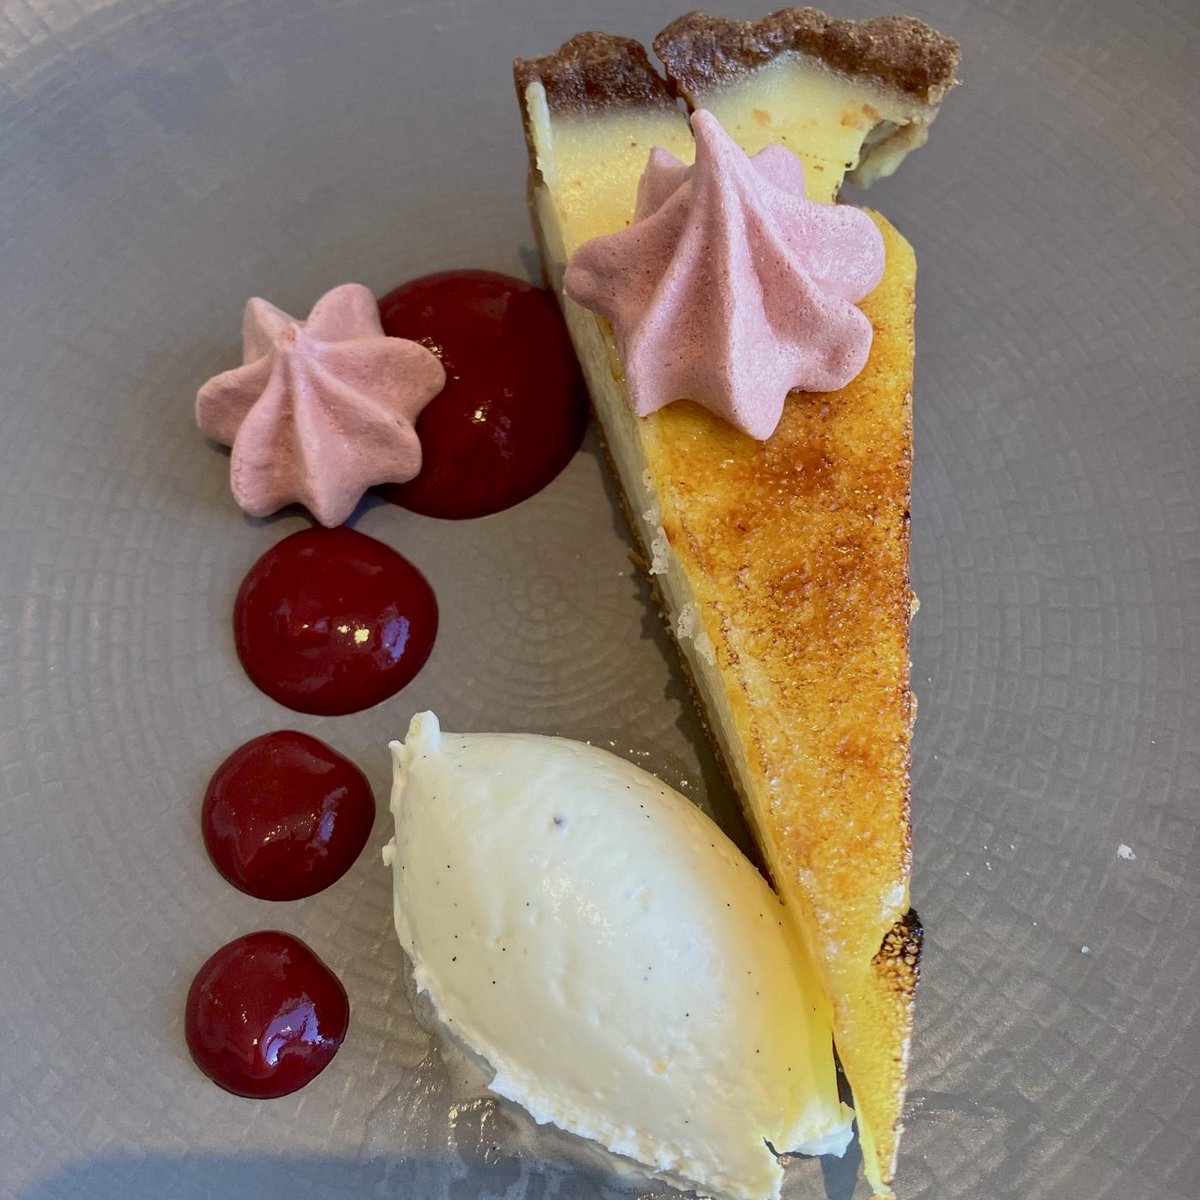 'Smoked haddock chowder; posh fish & chips and glazed lemon tart enjoyed during a visit to Upstairs at @no1cromer on a sunny day in #Cromer, North #Norfolk! 1 #AARosette retained.' - AA Inspector Learn more about our #AARosettes scheme here > tinyurl.com/yc2rtrdk